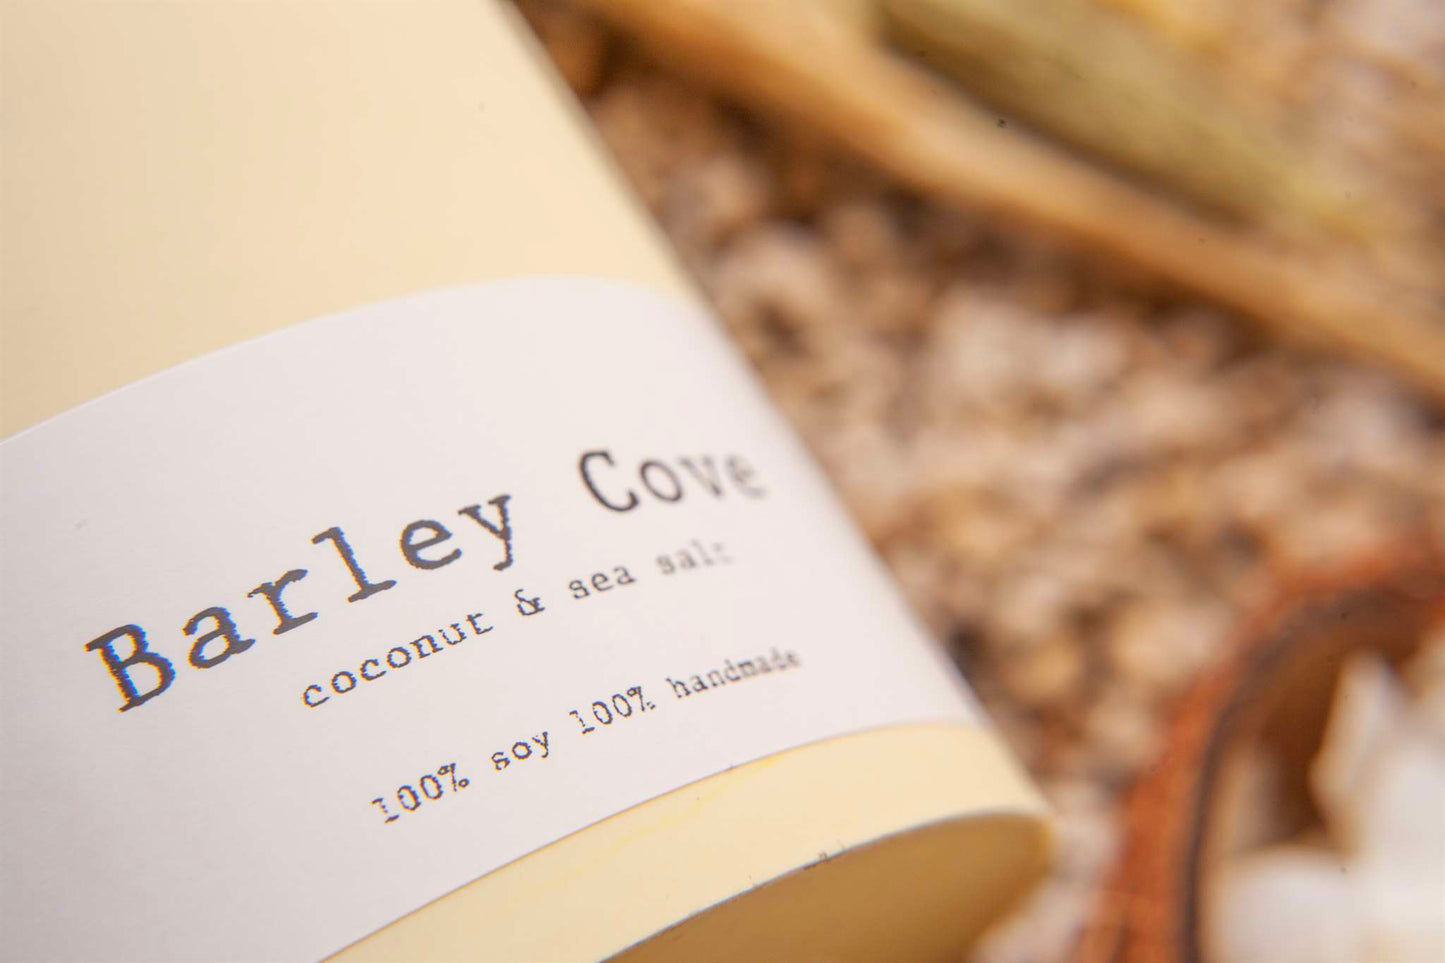 D8 Candle Co. Candles Barley Cove Candle - D8 Candle Co.